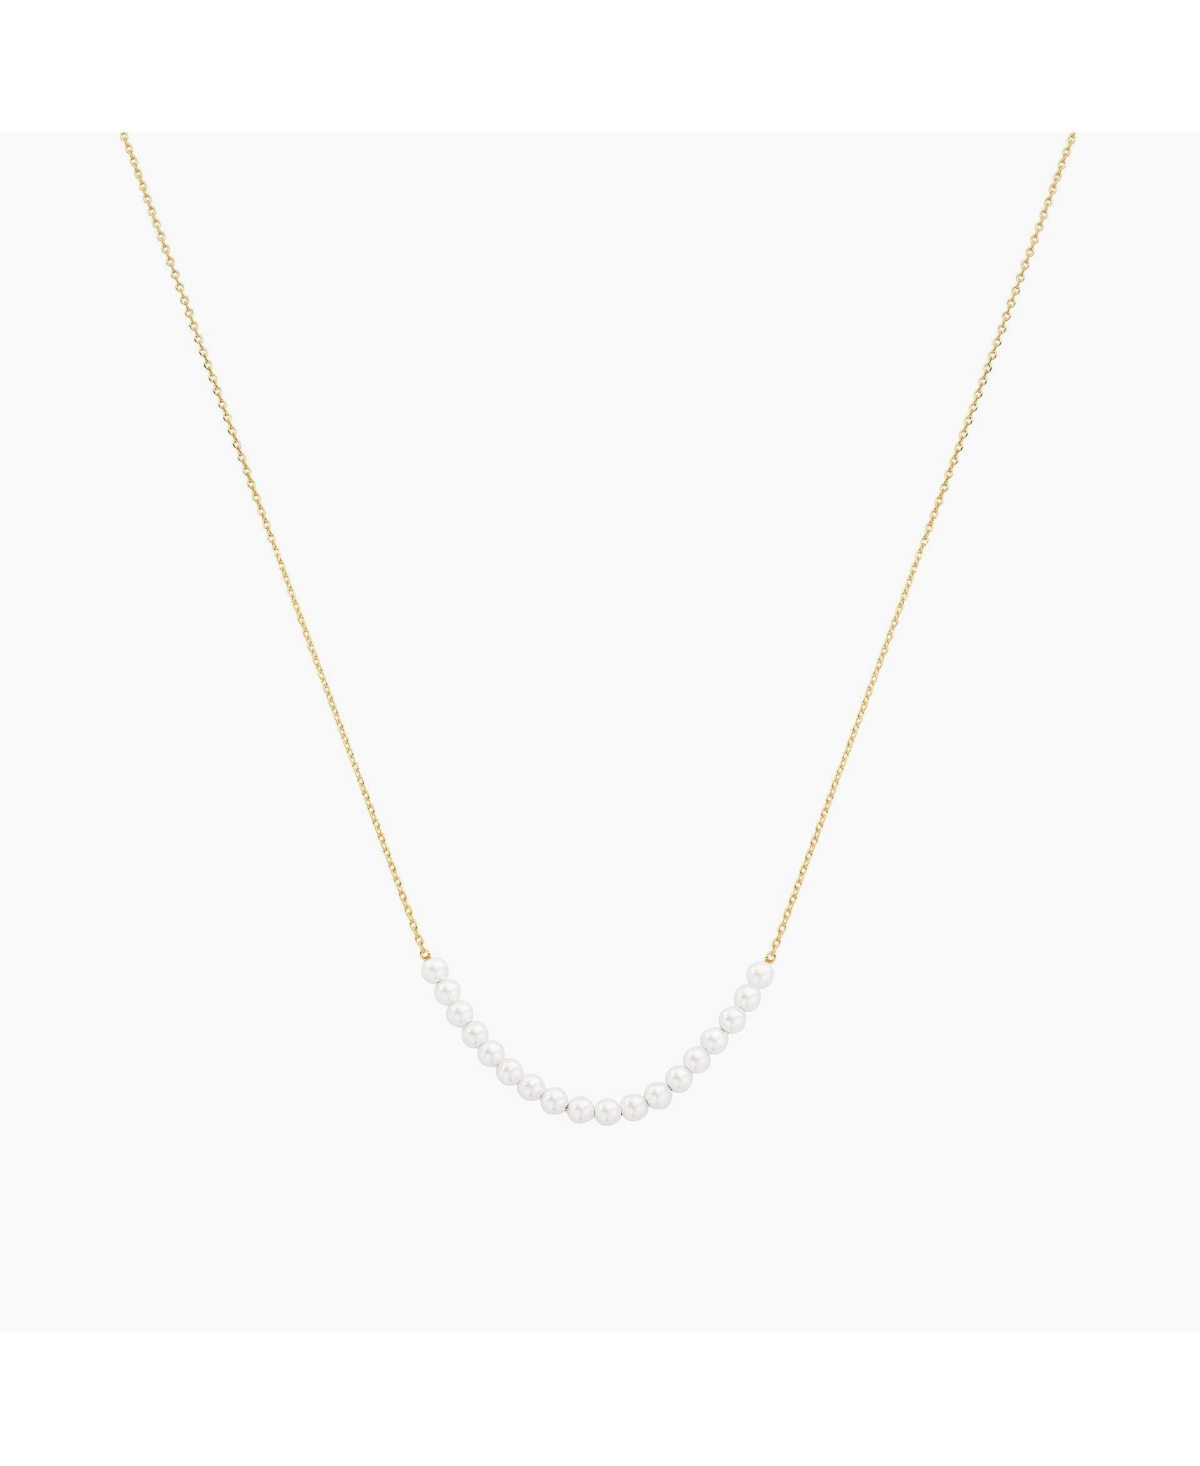 Rosalie Cultured Pearl Necklace - Yellow gold